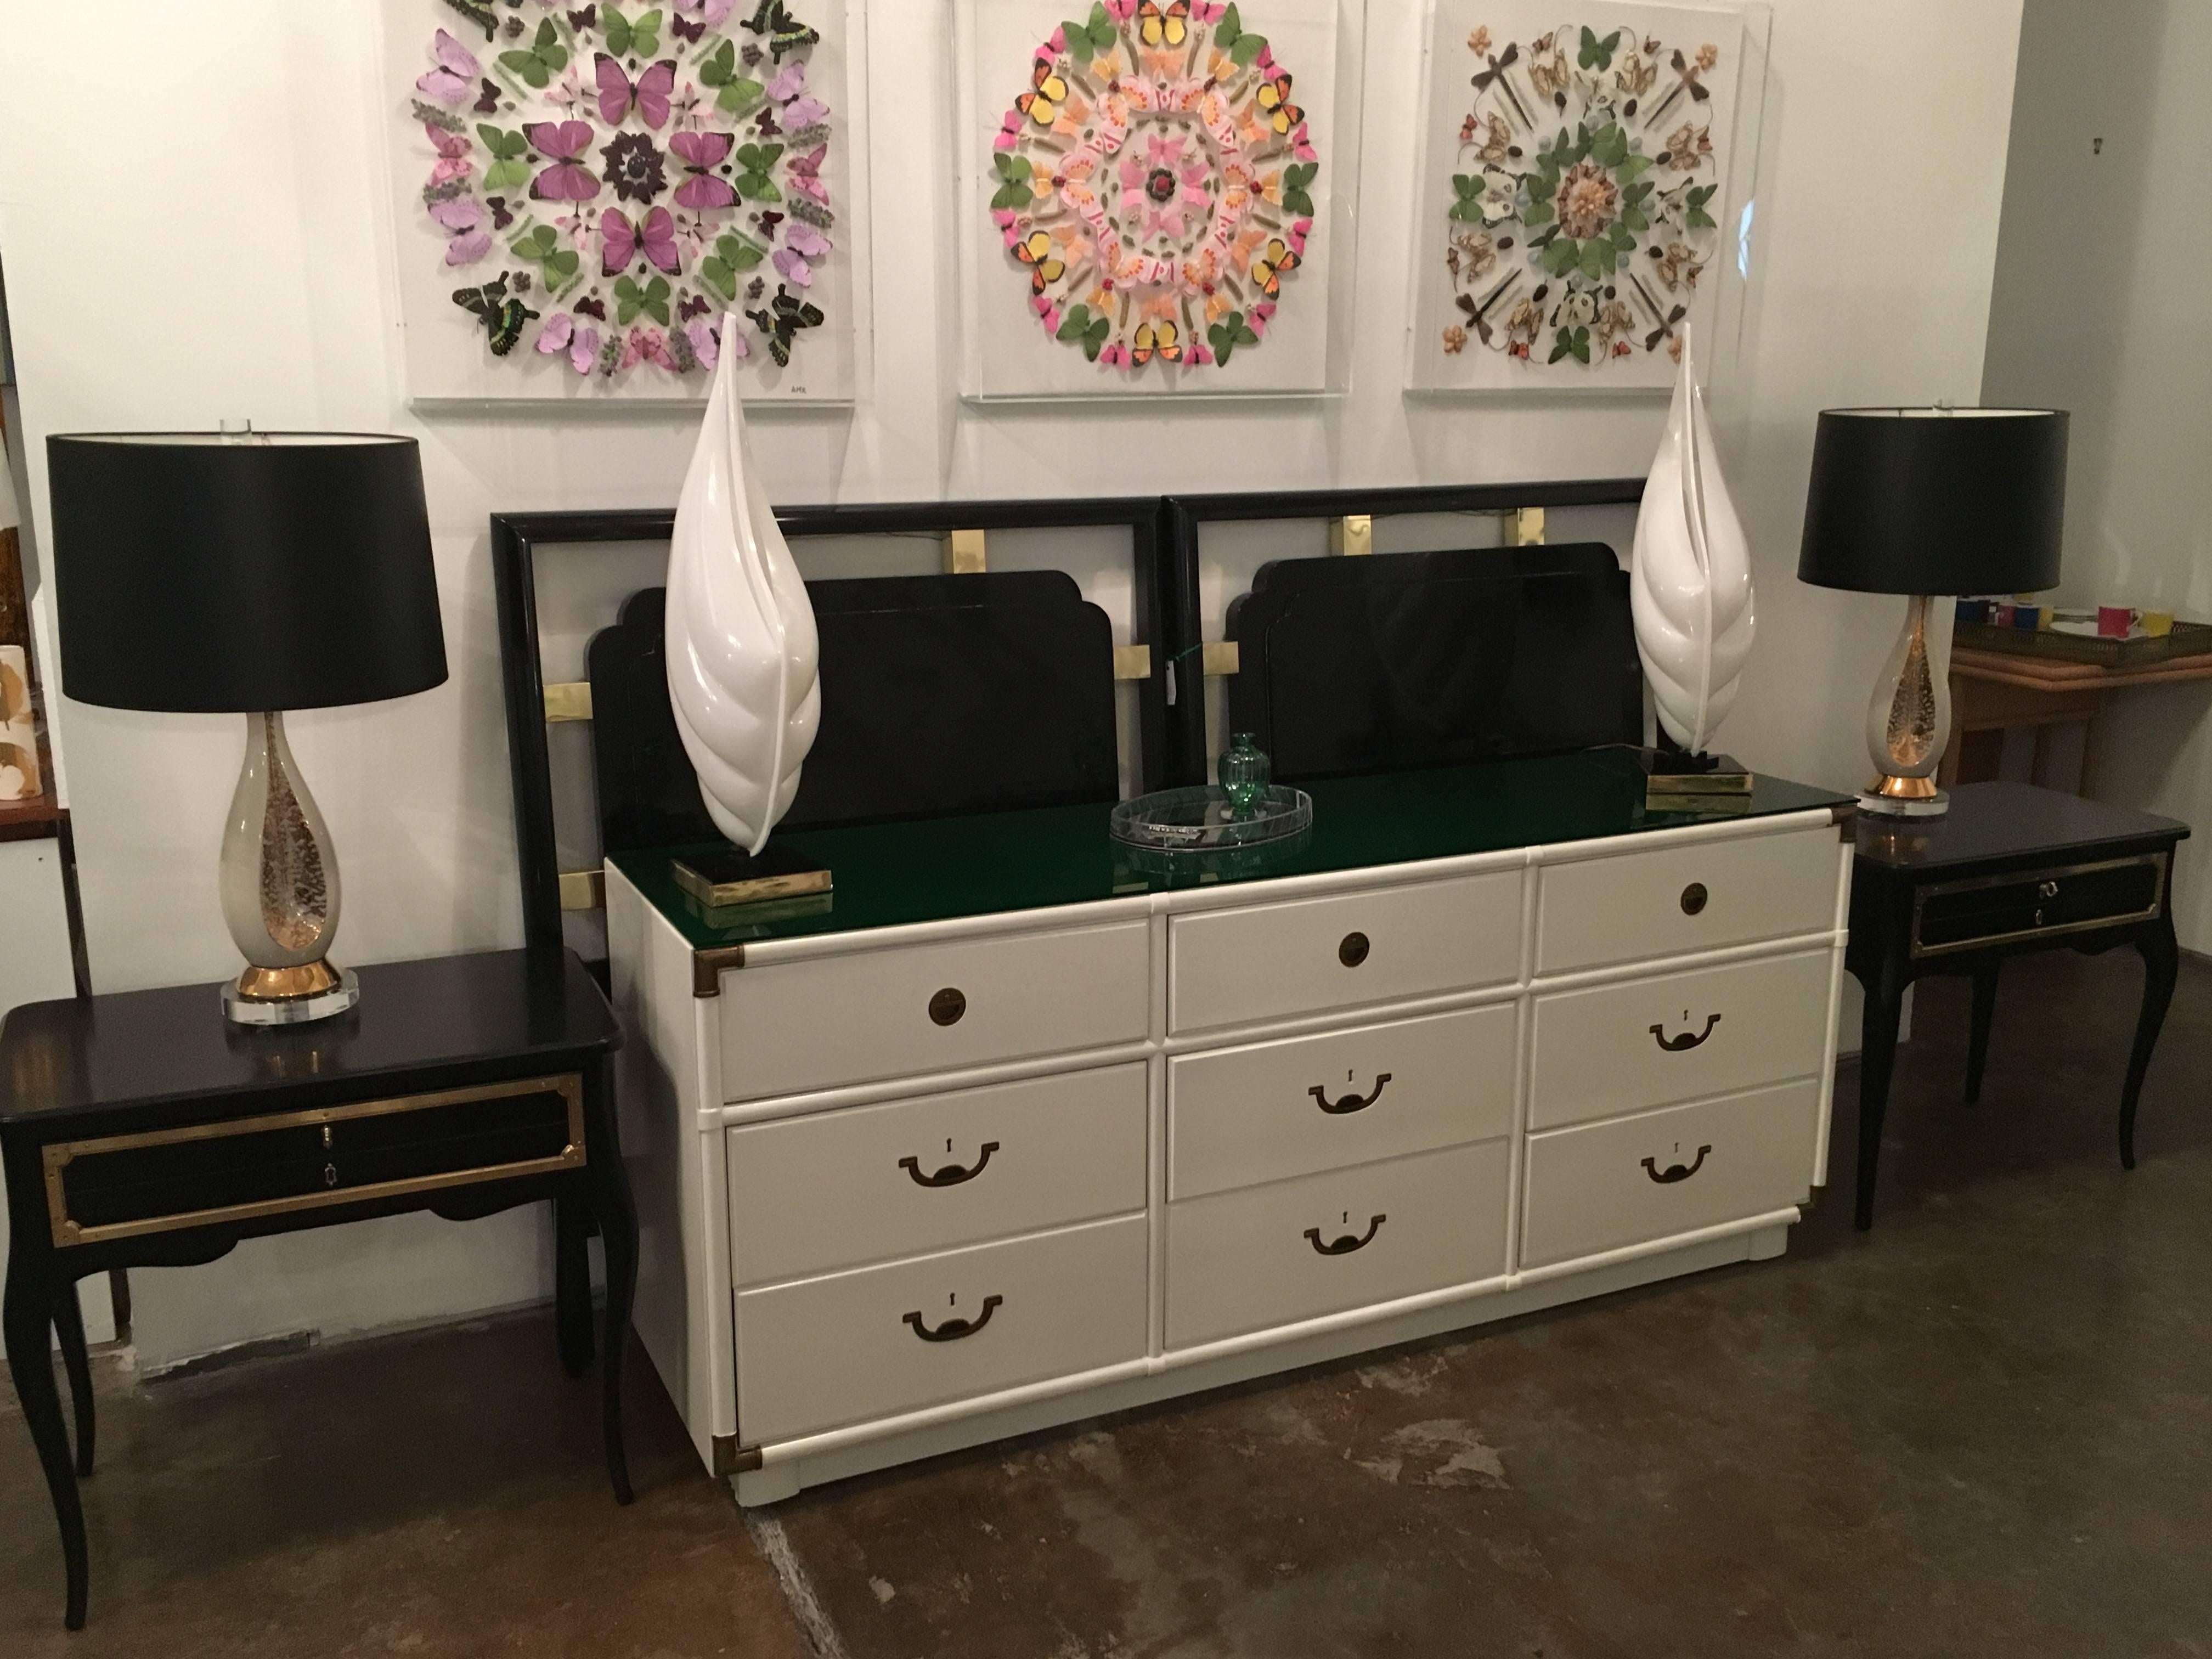 Offered is a pair of signed Hollywood regency Grosfeld House black lacquer and brass side tables. Grosfeld House Furniture Company led the up-market modern yet classical movement in furniture design and manufacture starting in the early 20th